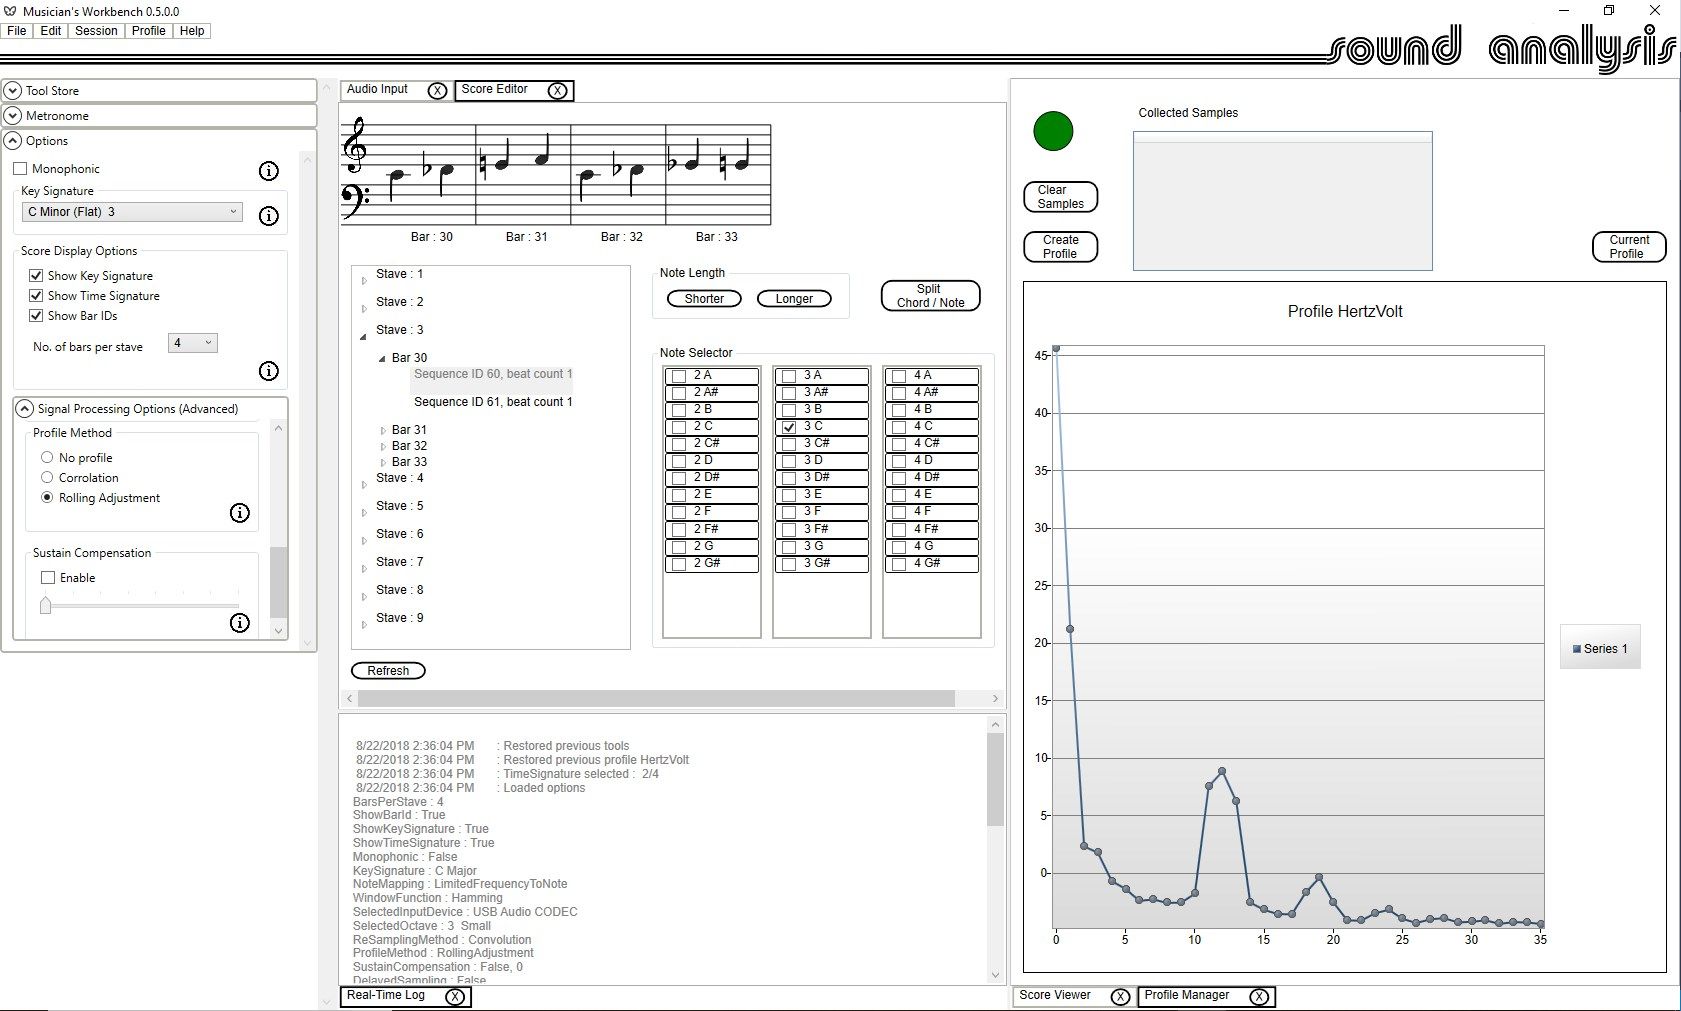 Musician's Workbench showing profile manager and score editor tools